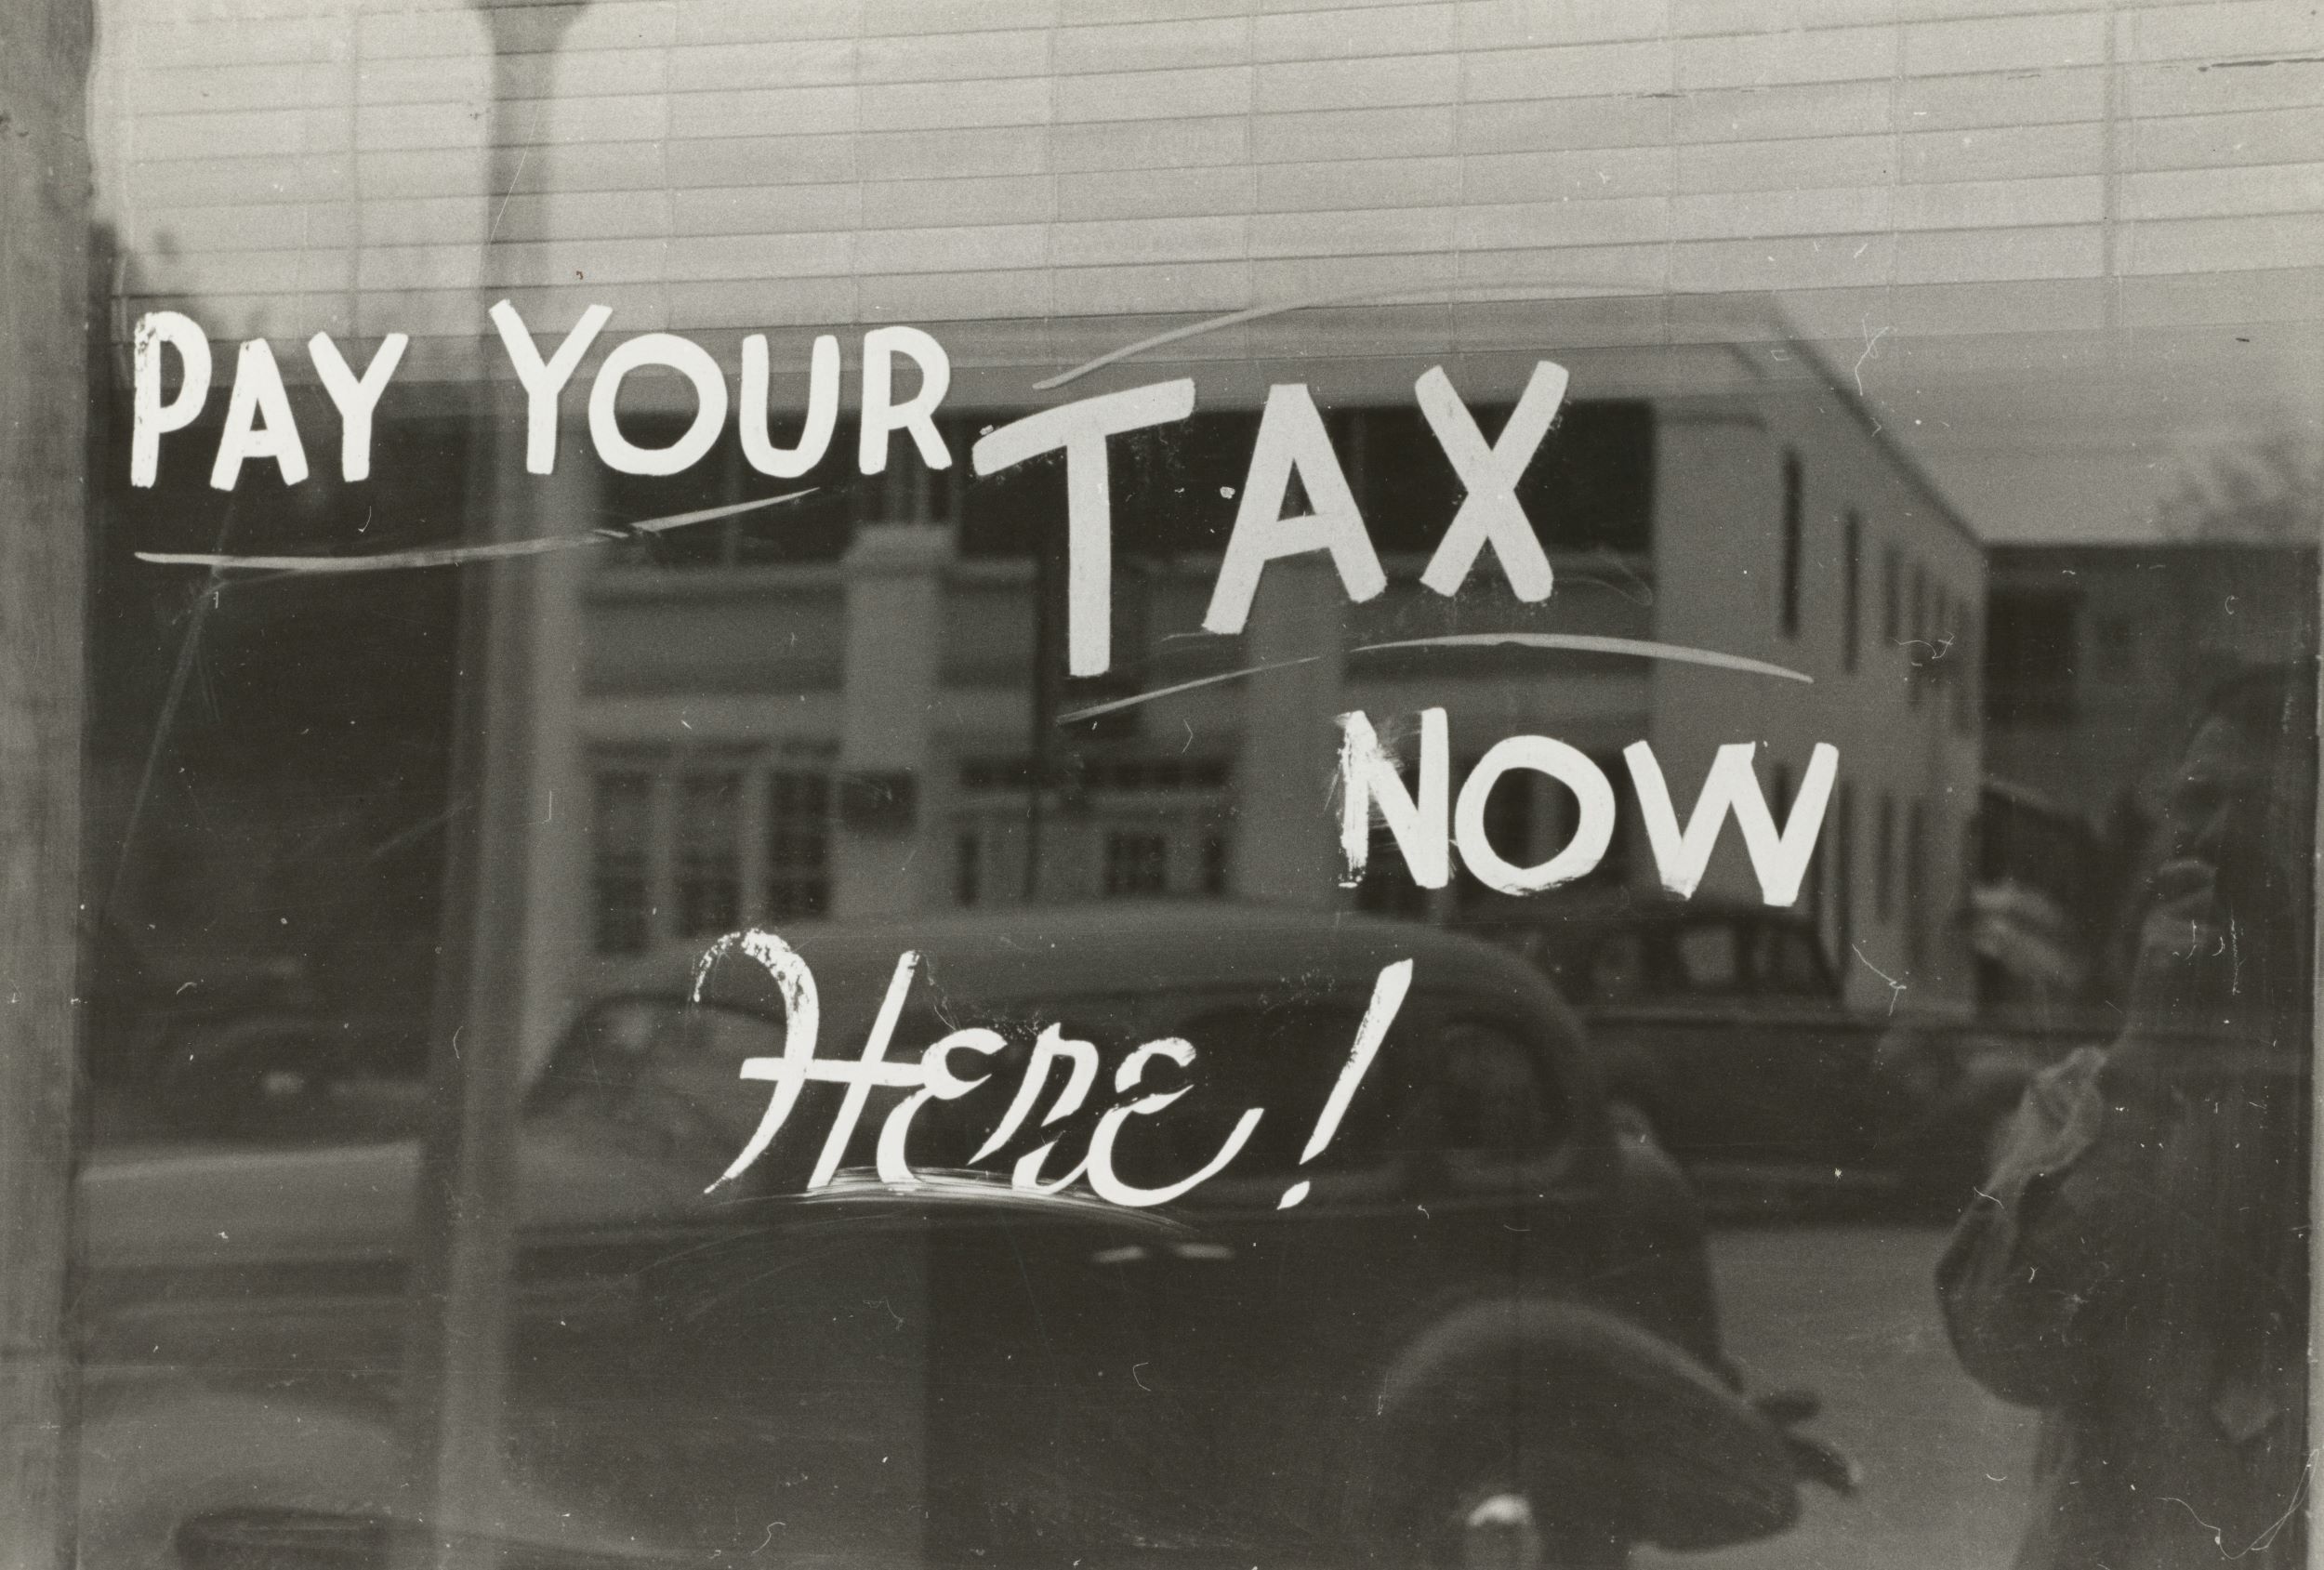 window sign that says "pay your tax now here!"